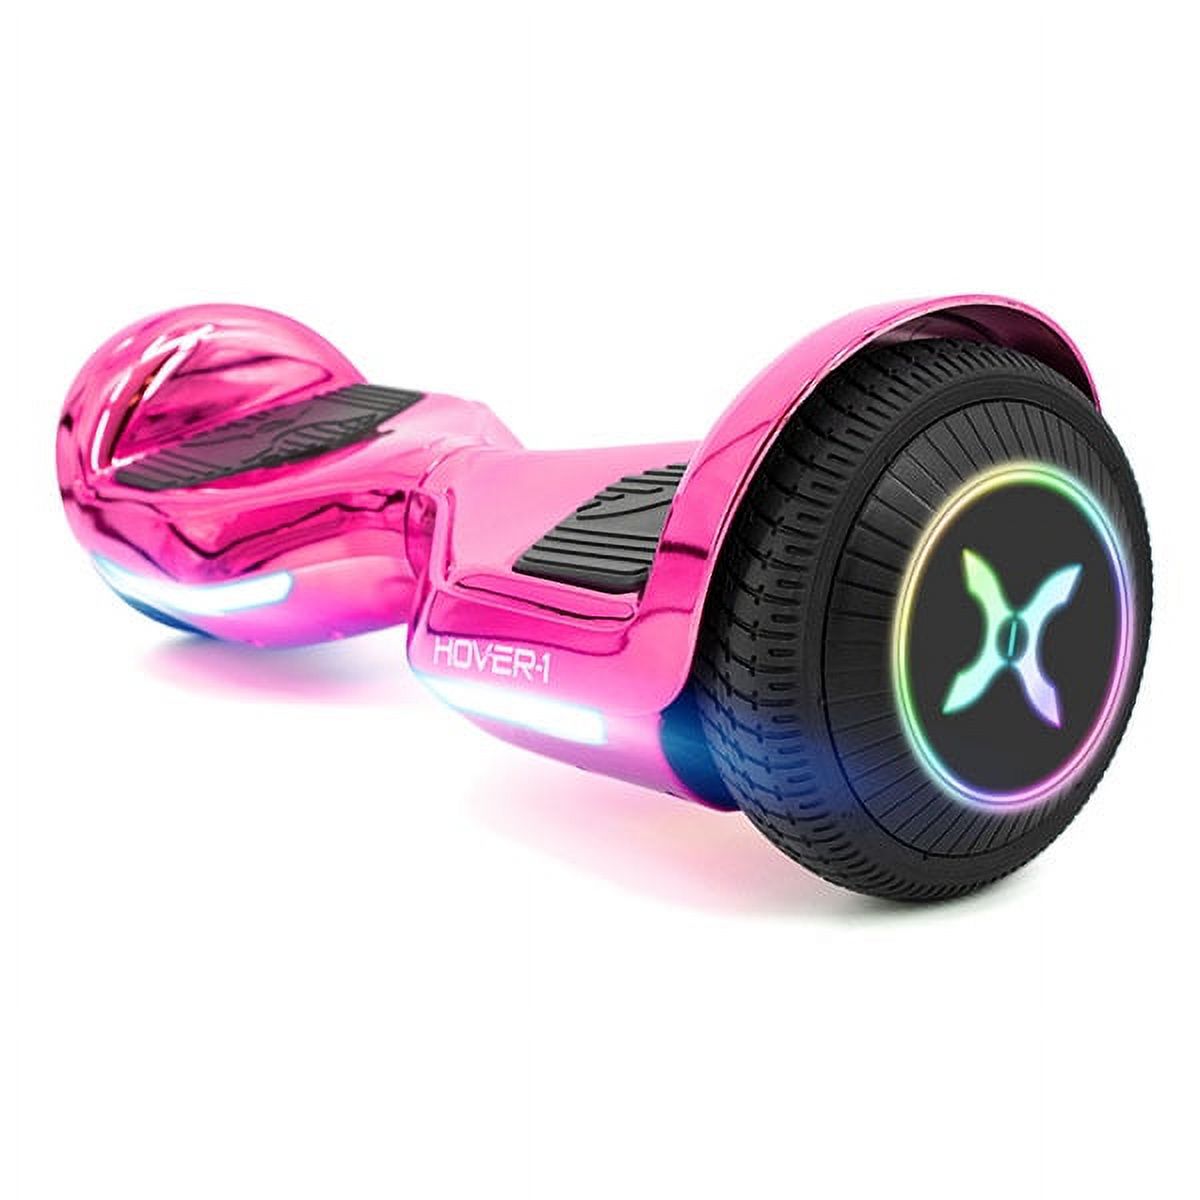 Hover-1 Allstar Hoverboard, Pink, 6.5in LED Wheels, LED Sensor Lights; Lithium-Ion 14 Cell Battery; Ideal for Boys and Girls 8+ and Less Than 220 lbs, UL Certified Electric Hoverboard - image 1 of 9